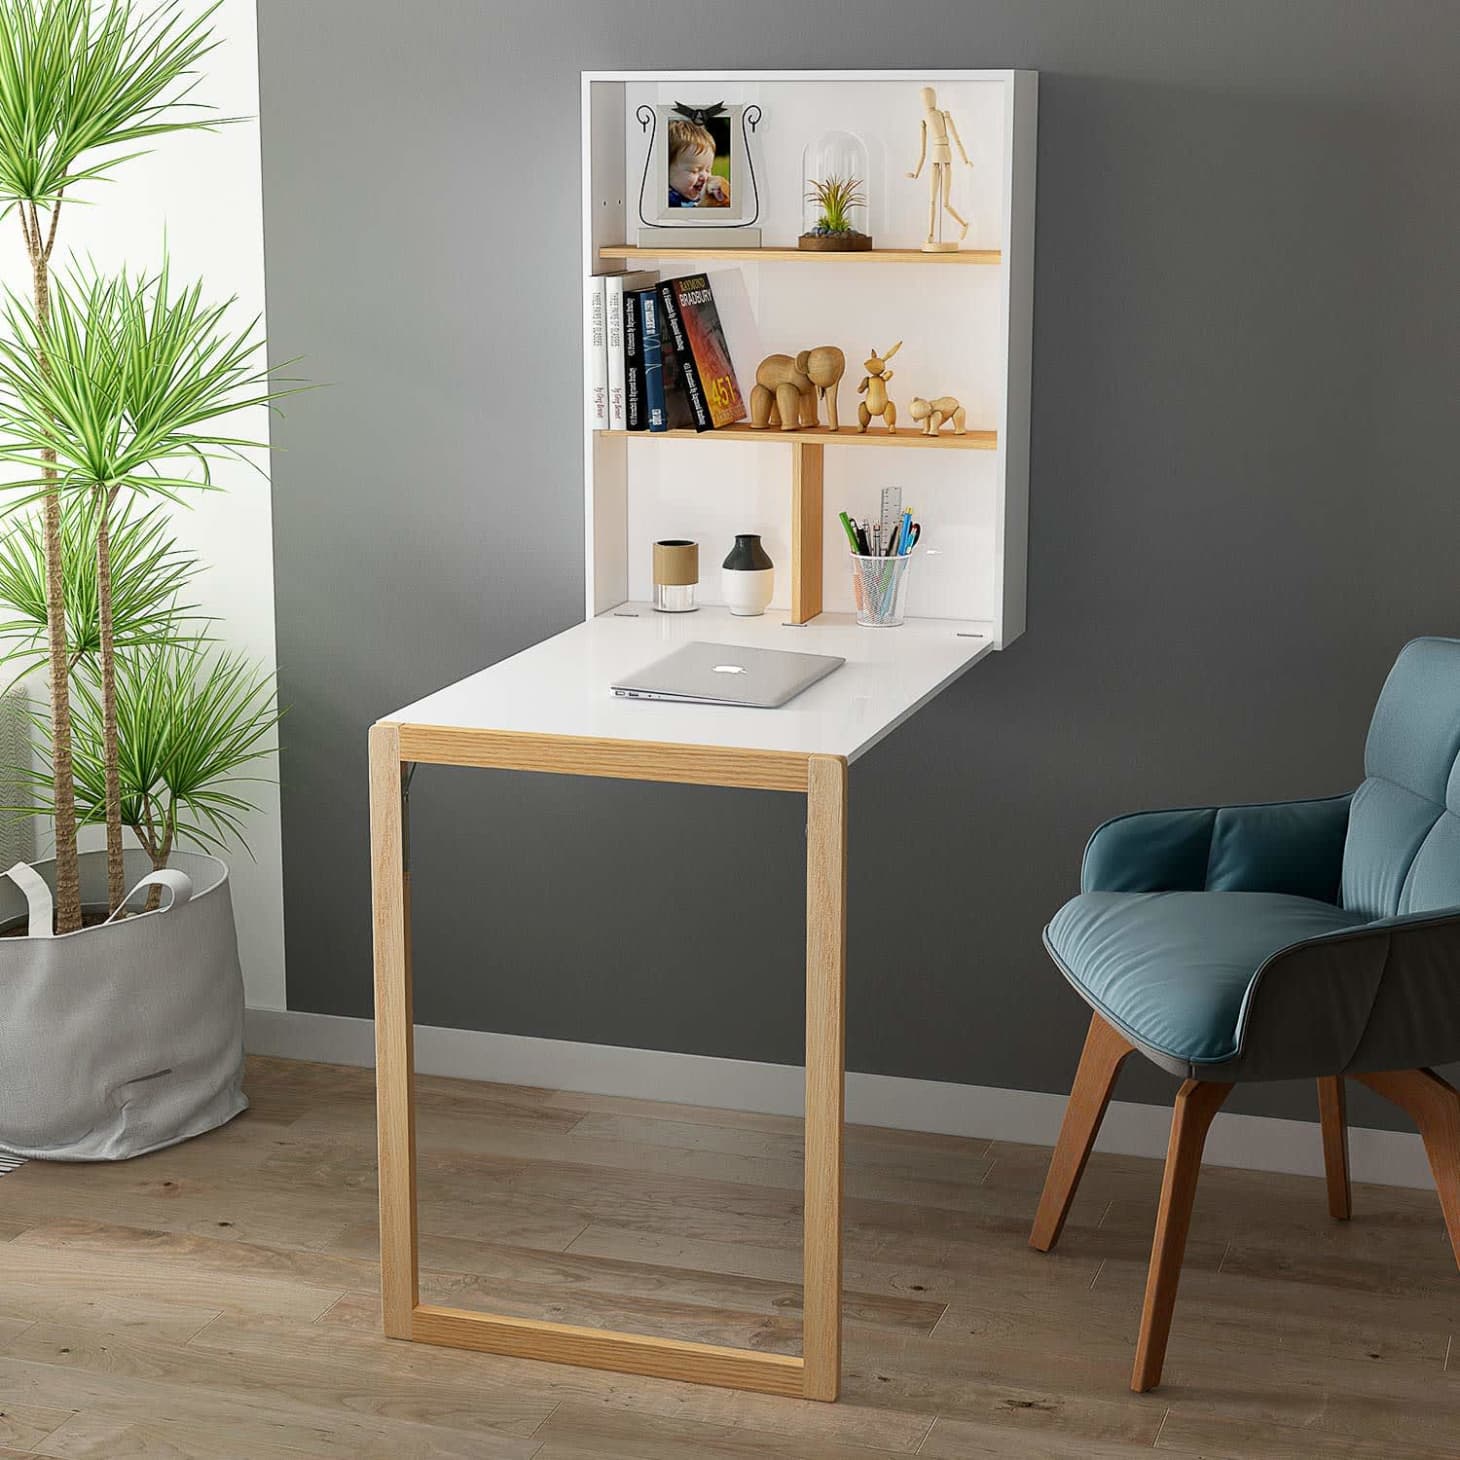 The Best Wall-Mounted Folding Desks 2019 | Apartment Therapy